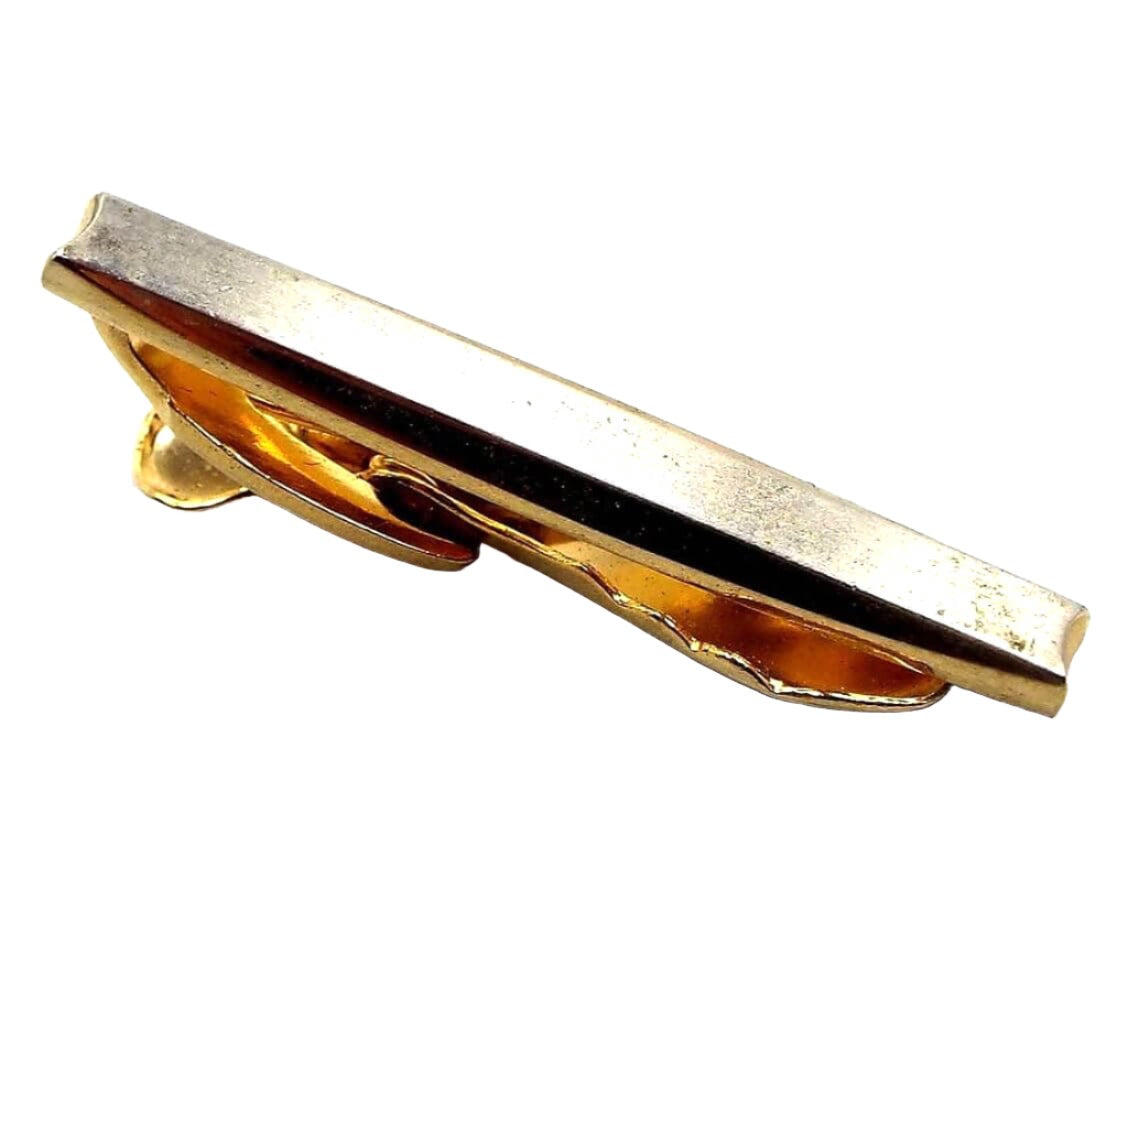 Angled view of the Mid Century vintage Hickok tie clip. It is gold tone in color on the sides and back part of the tie clip. The front is matte silver tone color. Each end has an indented curve. 